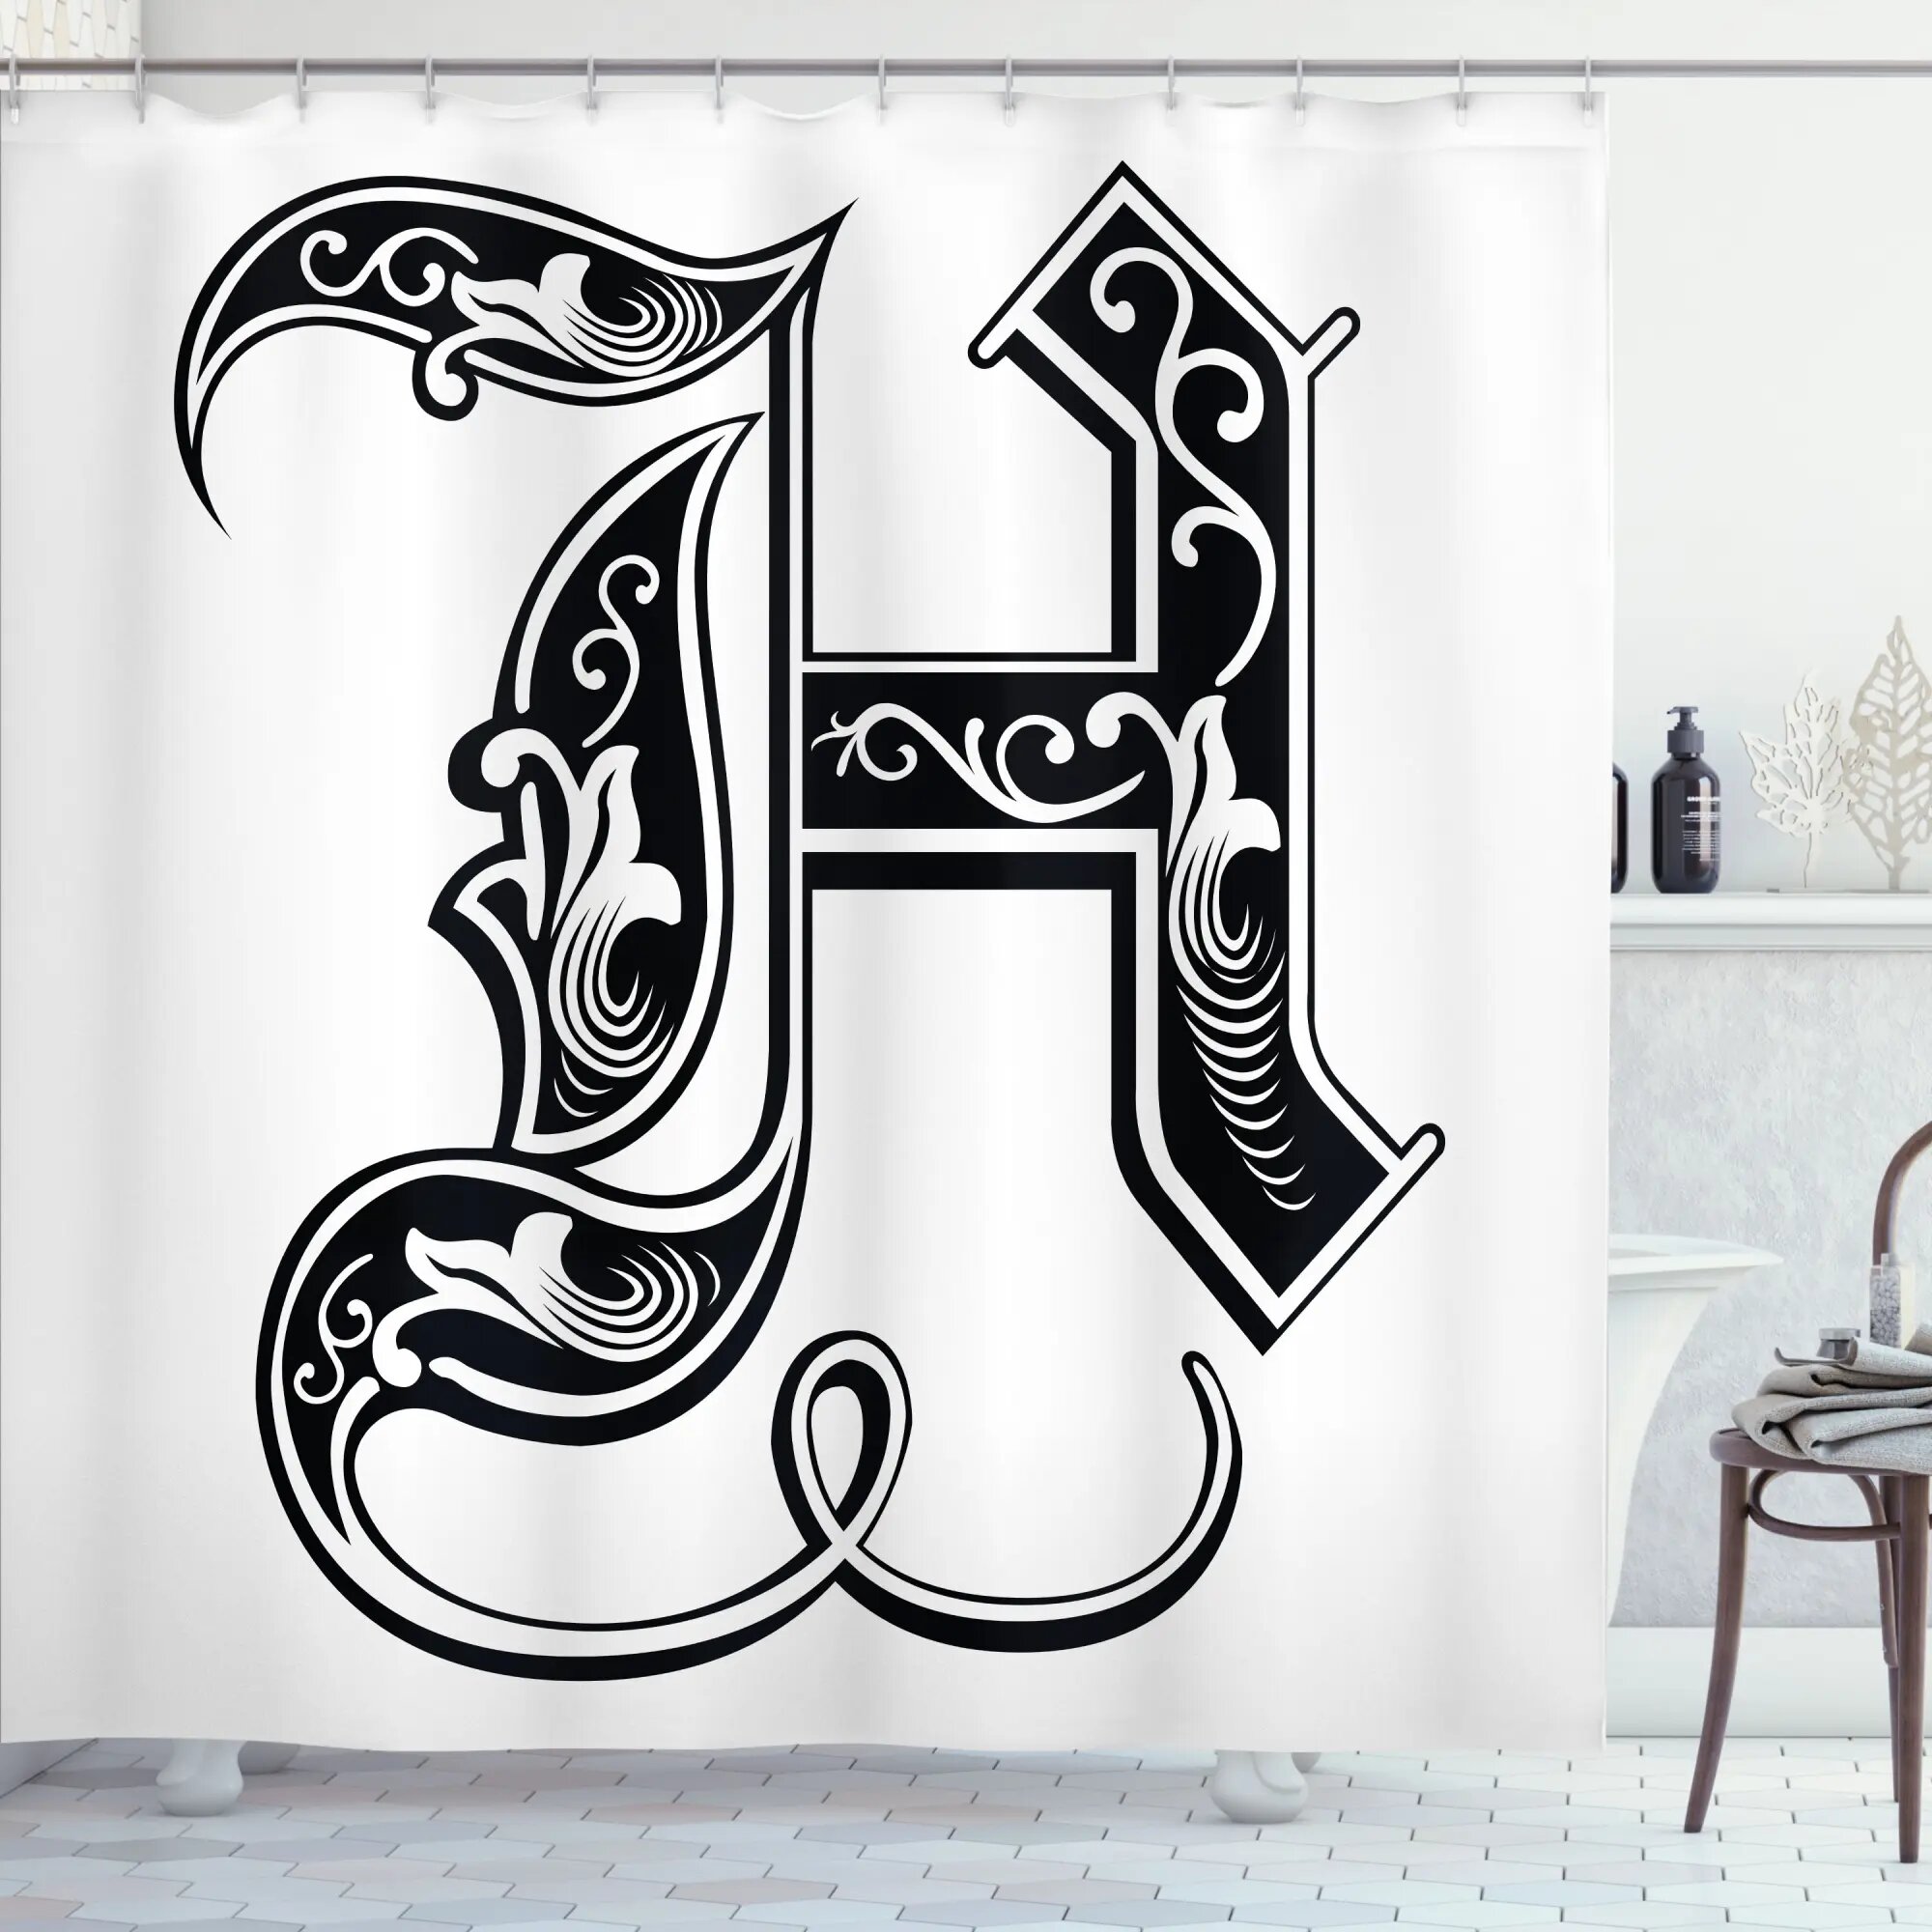 Letter H Shower Curtain Set + Hooks East Urban Home Size: 75 H x 69 W